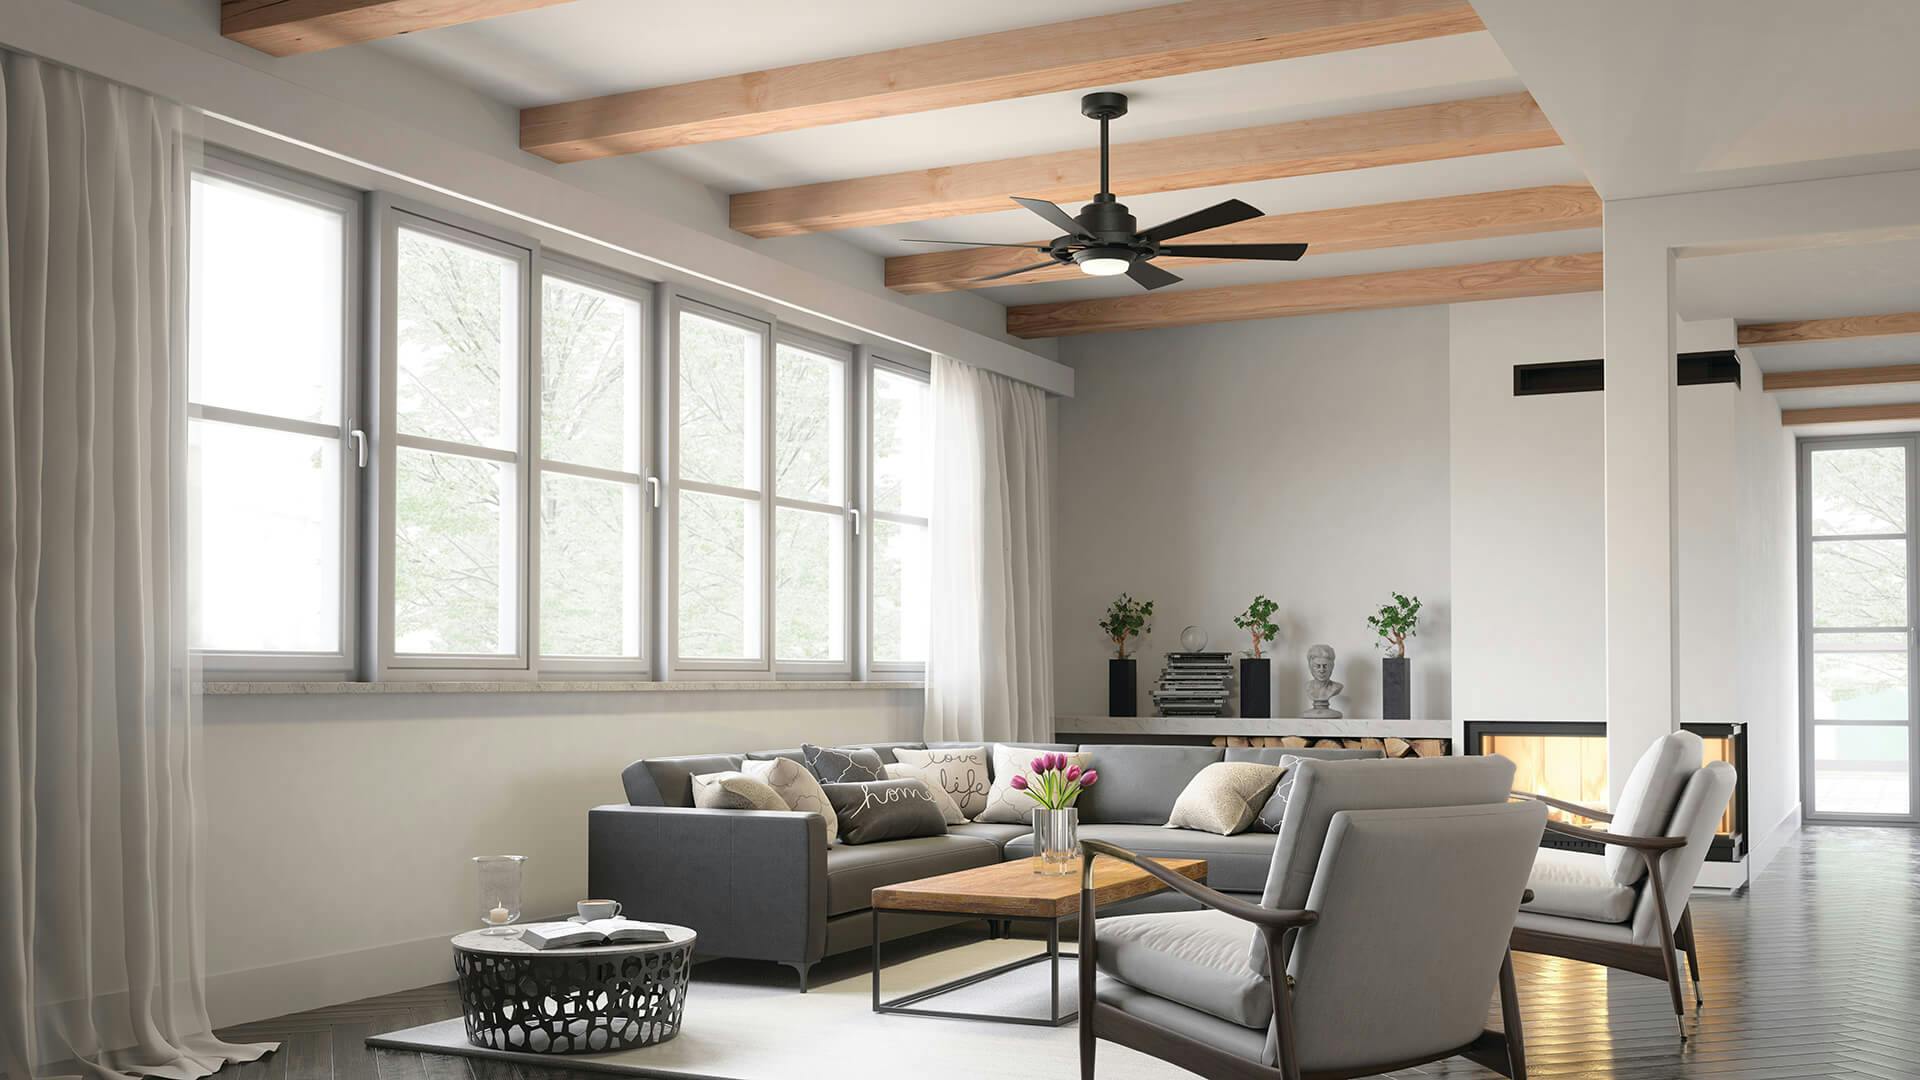 Open living room with many windows, fireplace and Irias ceiling fan